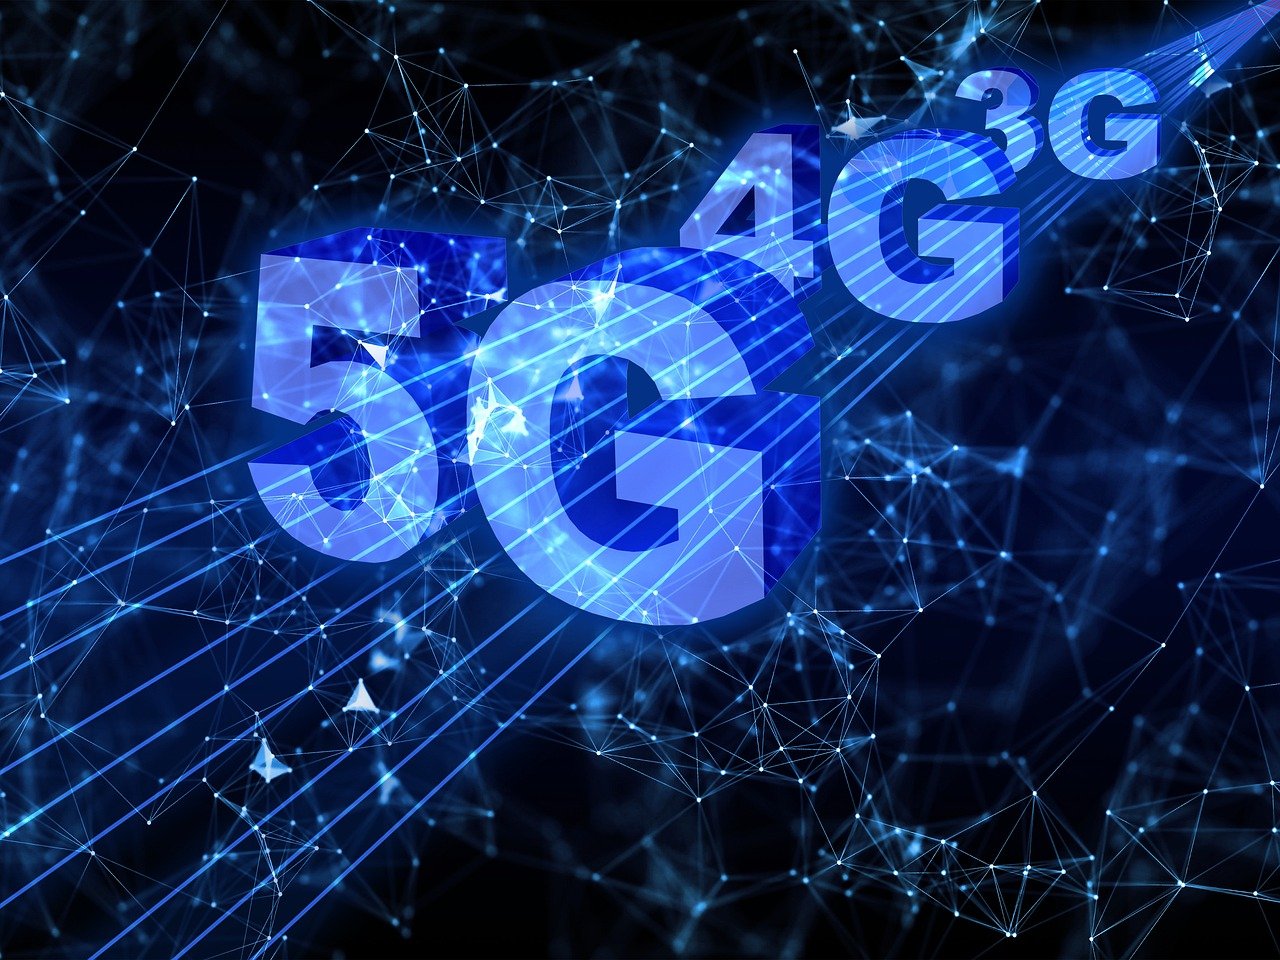 https://www.itnewsafrica.com/2021/09/safaricom-announces-launch-date-for-commercial-5g-network/